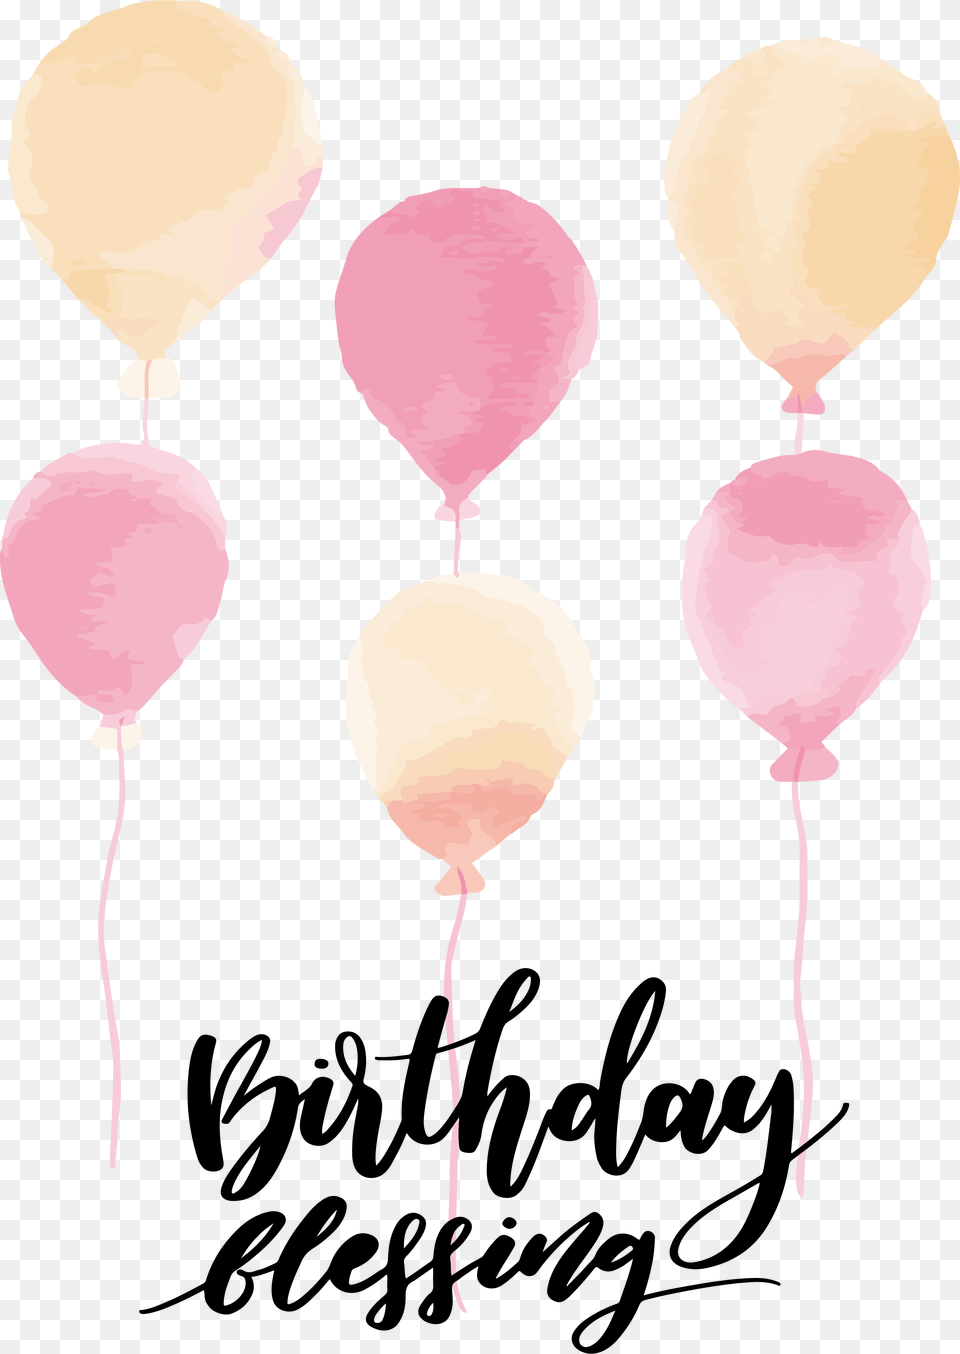 Watercolor Painting Balloon Computer File Pink Watercolor Balloons, Text Free Png Download